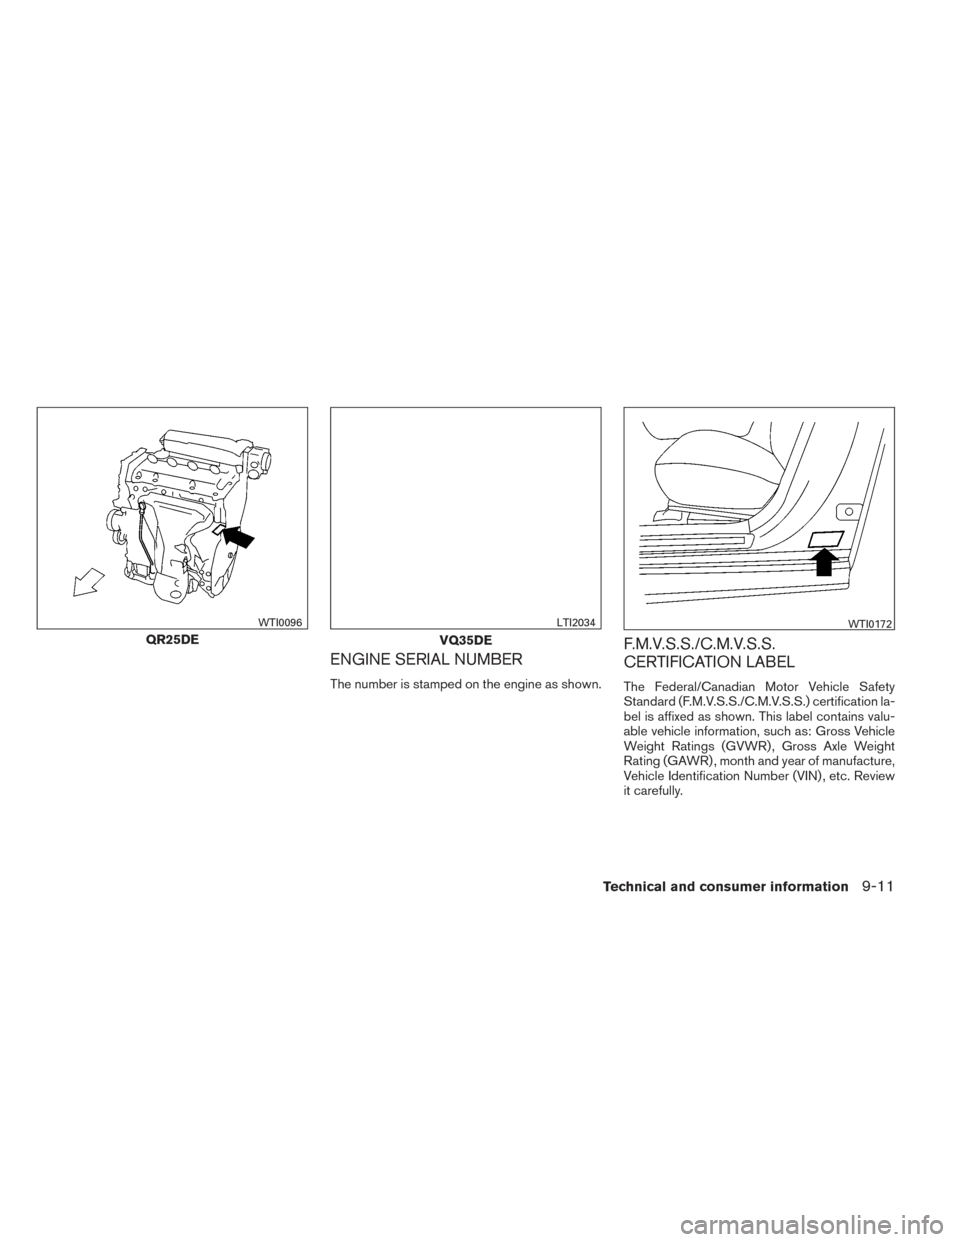 NISSAN ALTIMA 2014 L33 / 5.G Owners Manual ENGINE SERIAL NUMBER
The number is stamped on the engine as shown.
F.M.V.S.S./C.M.V.S.S.
CERTIFICATION LABEL
The Federal/Canadian Motor Vehicle Safety
Standard (F.M.V.S.S./C.M.V.S.S.) certification la